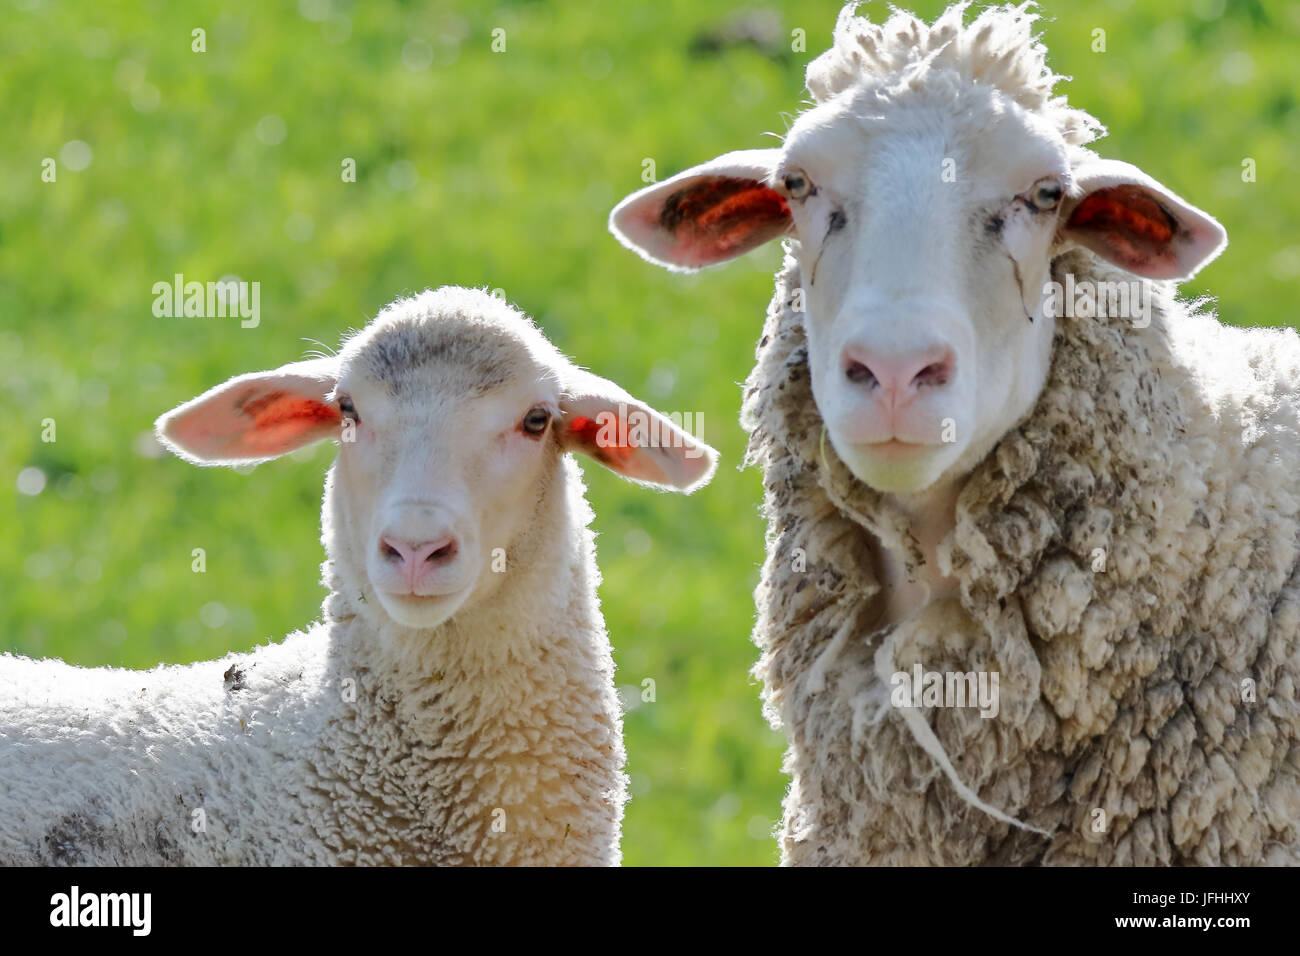 Mother animal and lamb portrait Stock Photo